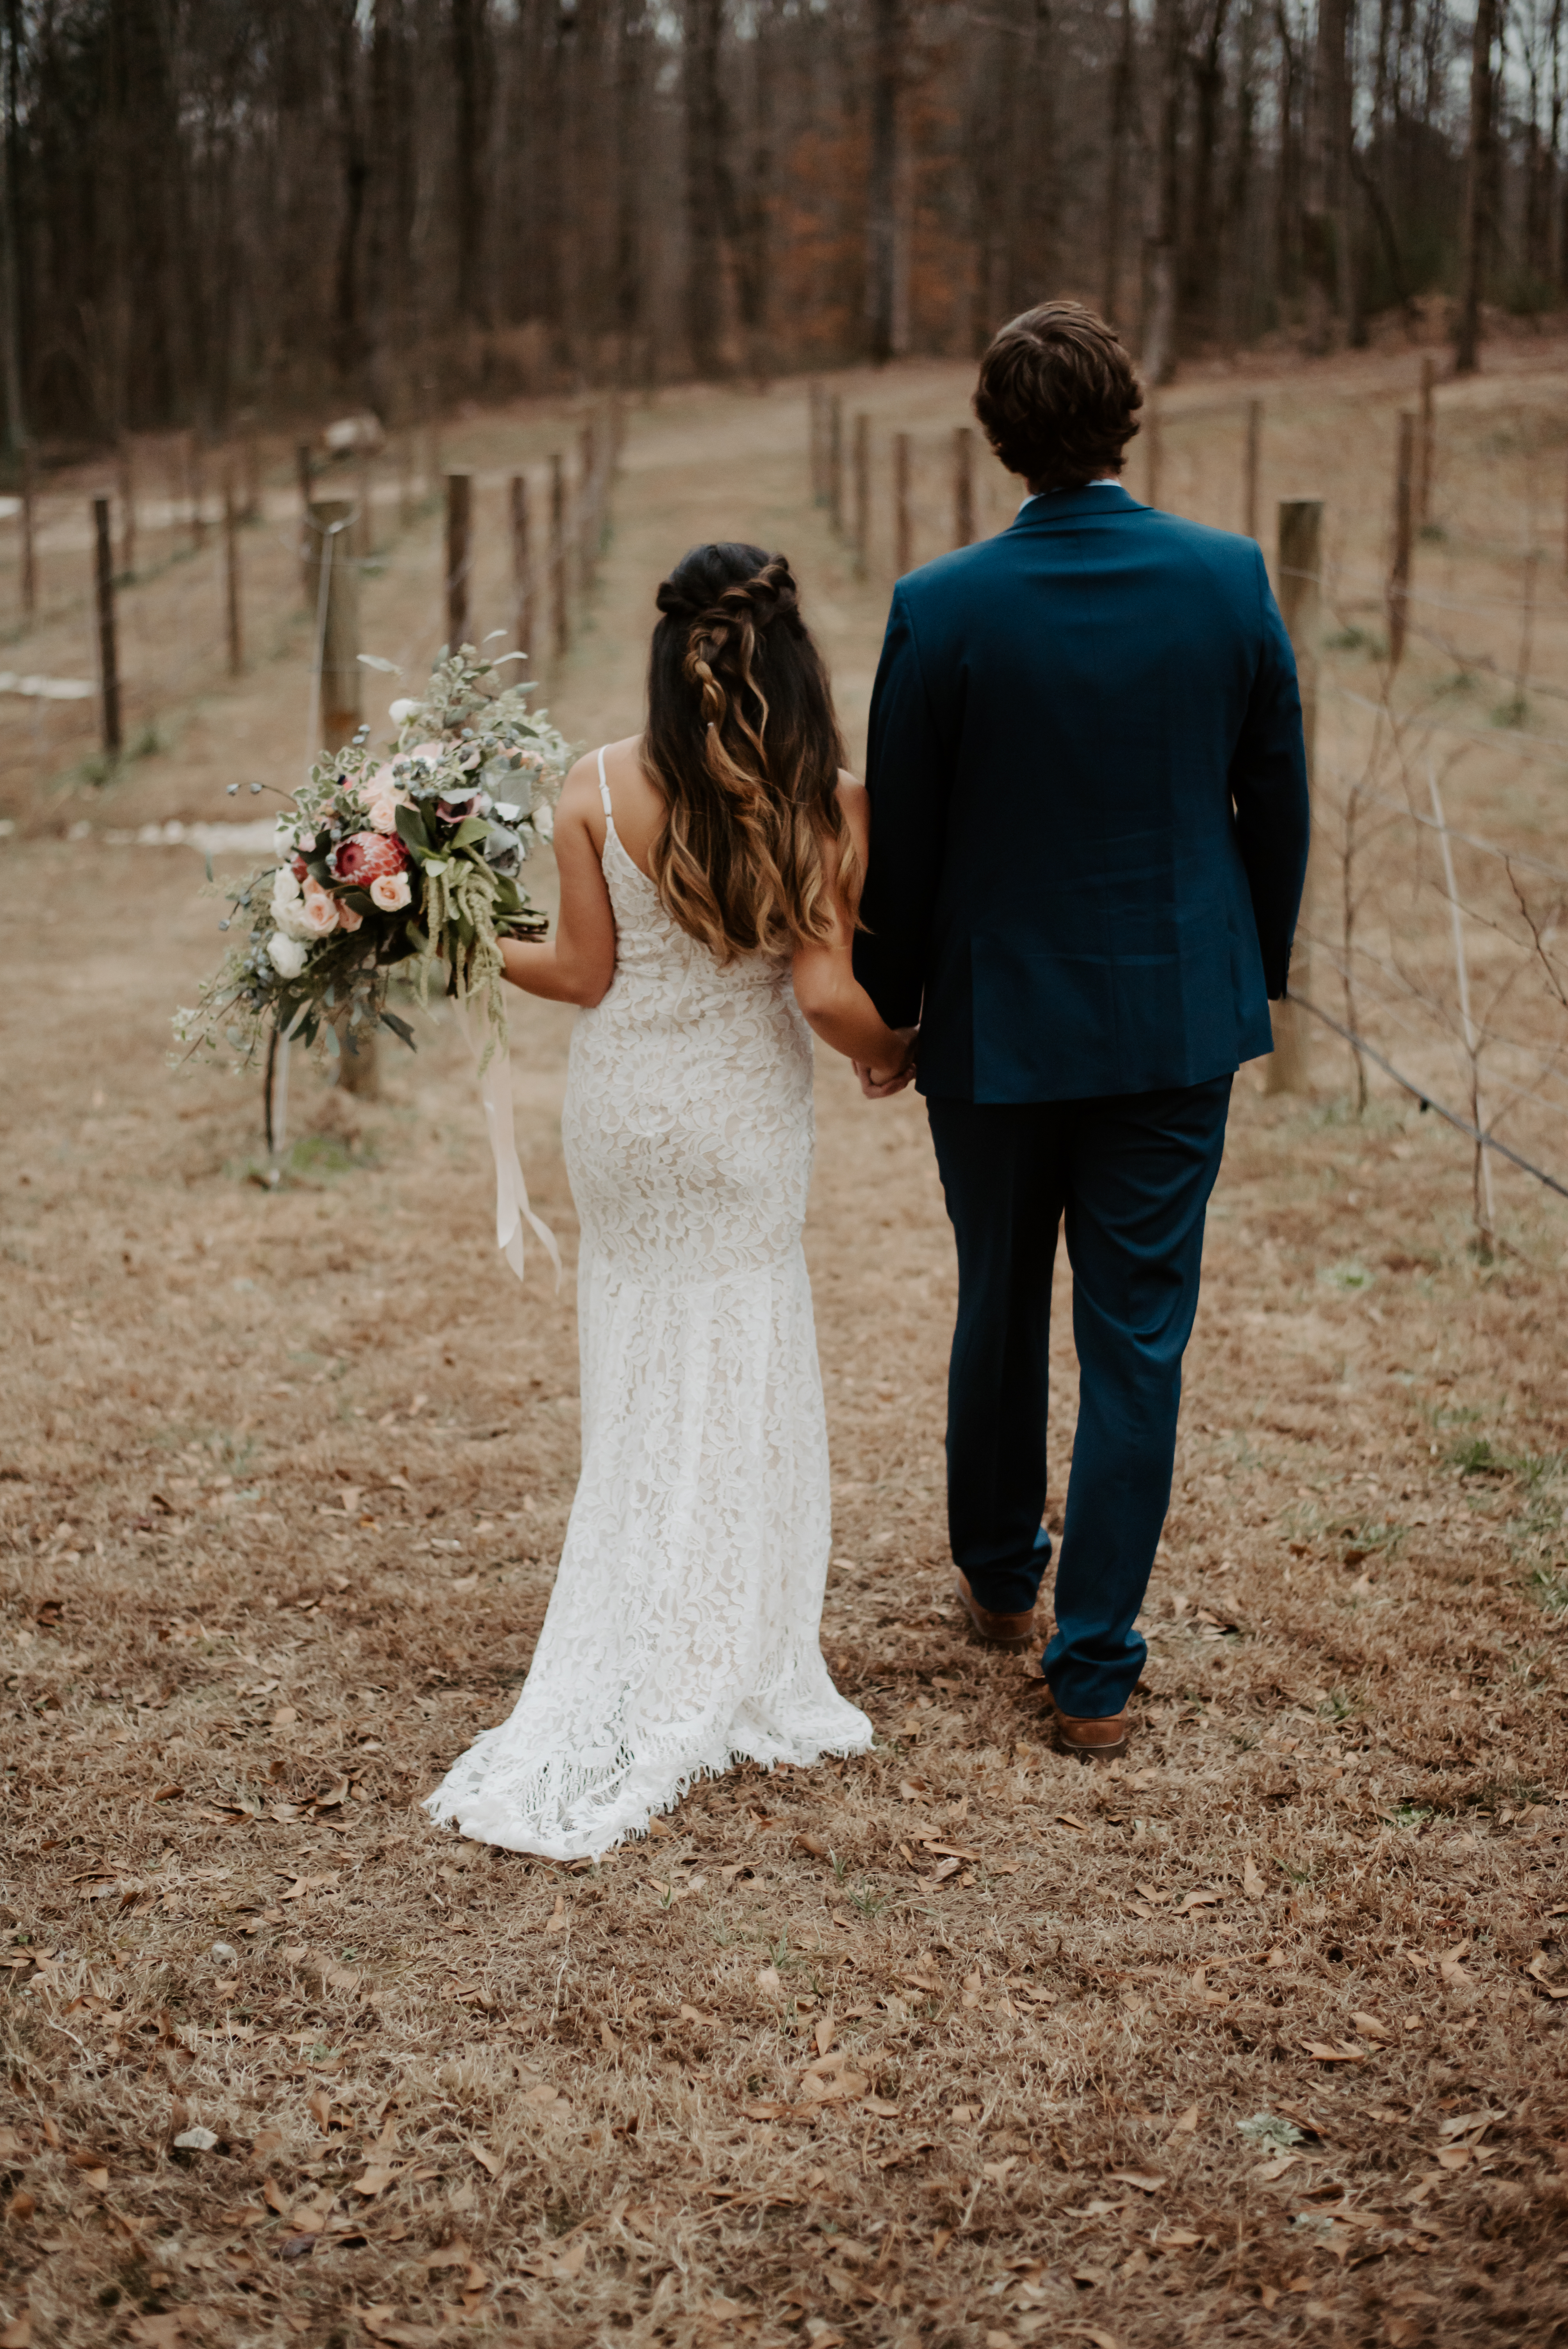 The vineyard was dried out but it still gave them a gorgeous background for their bohemian wedding flowers